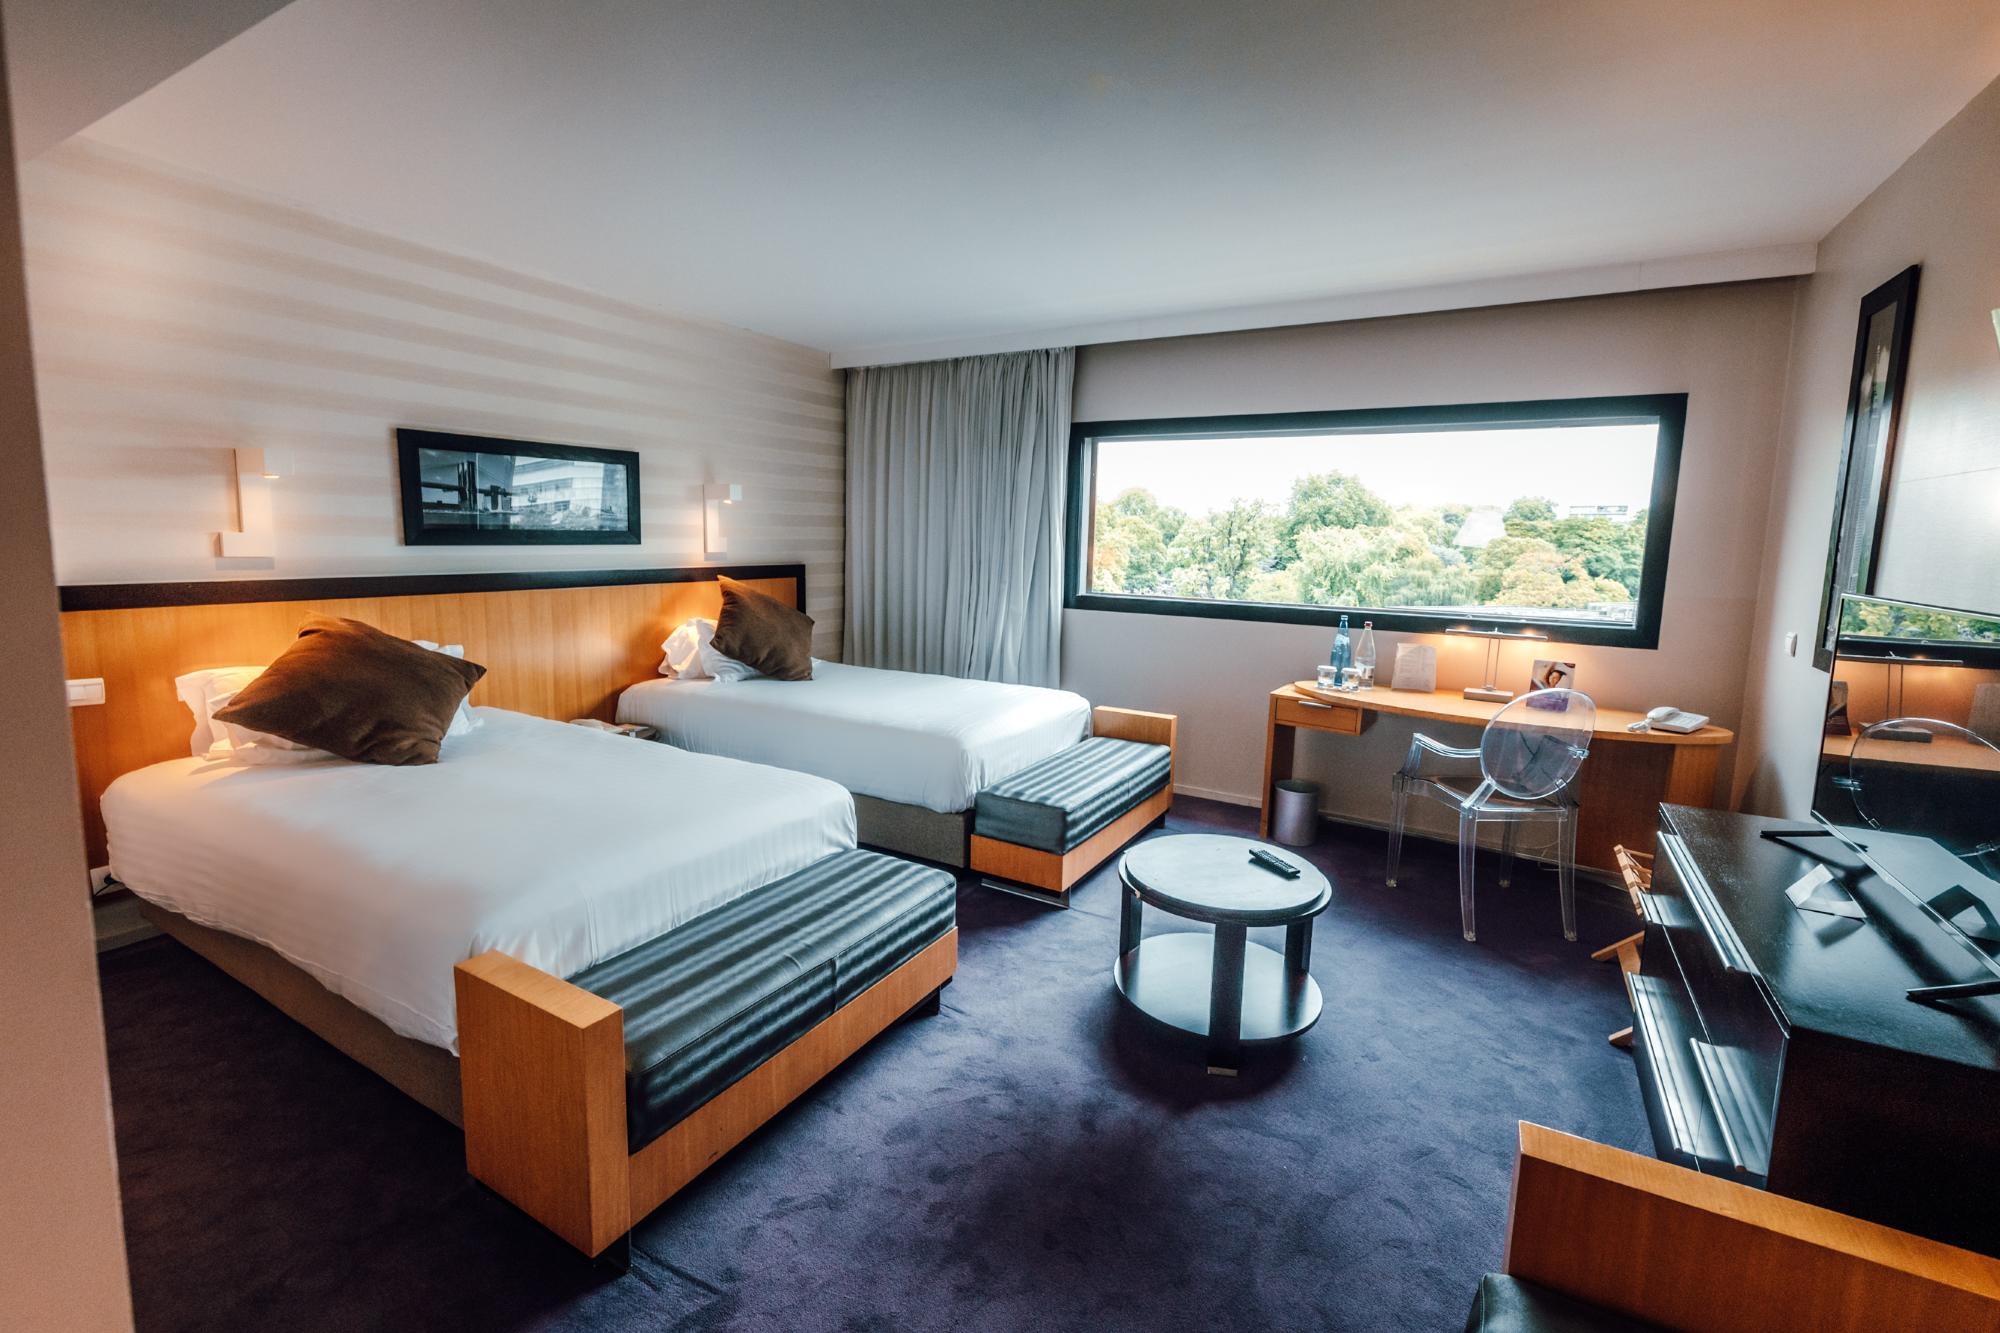 Hotel Crowne Plaza Lille | Superior Room twin beds